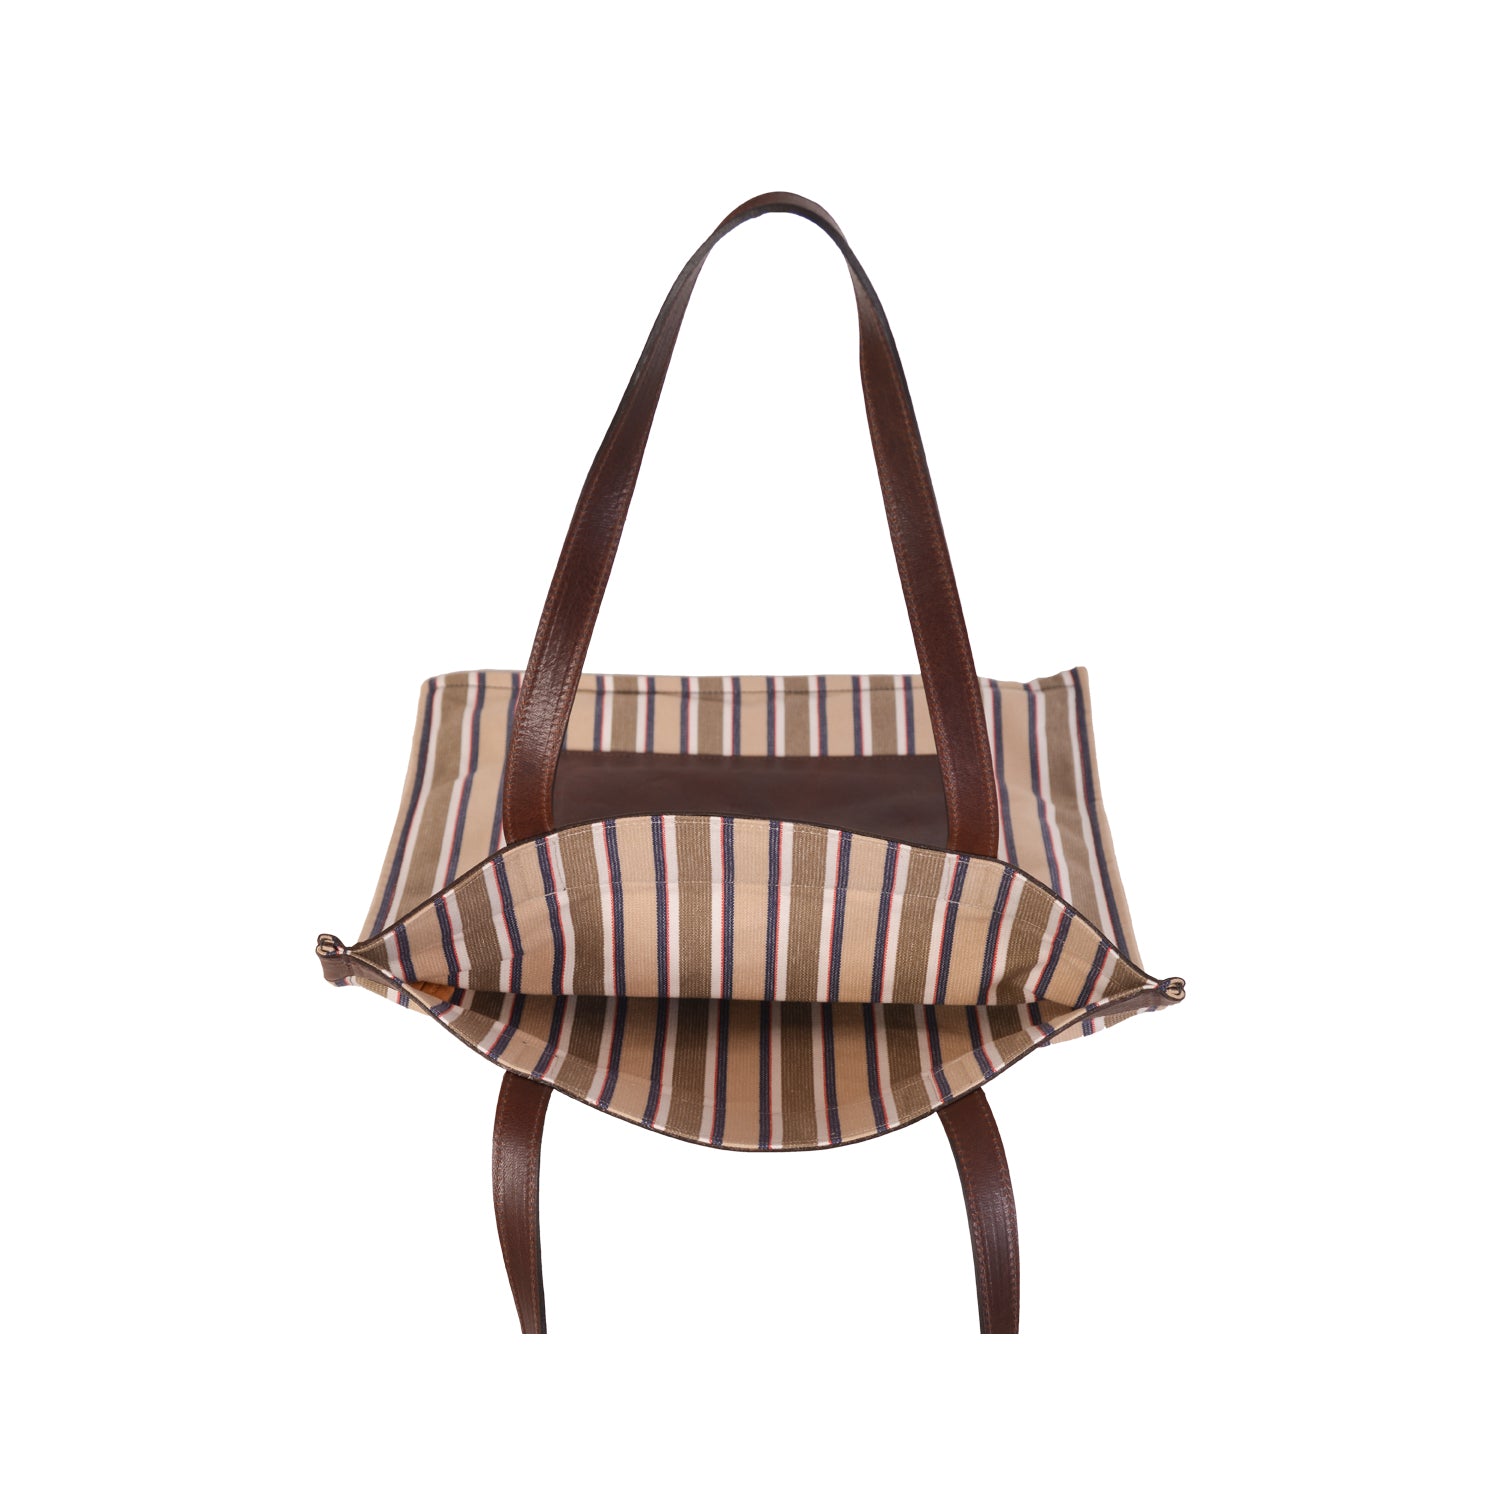 NEW IL BISONTE WOMEN'S FLAT TOTE BAG  IN BROWN STRIPED COTTON CANVAS